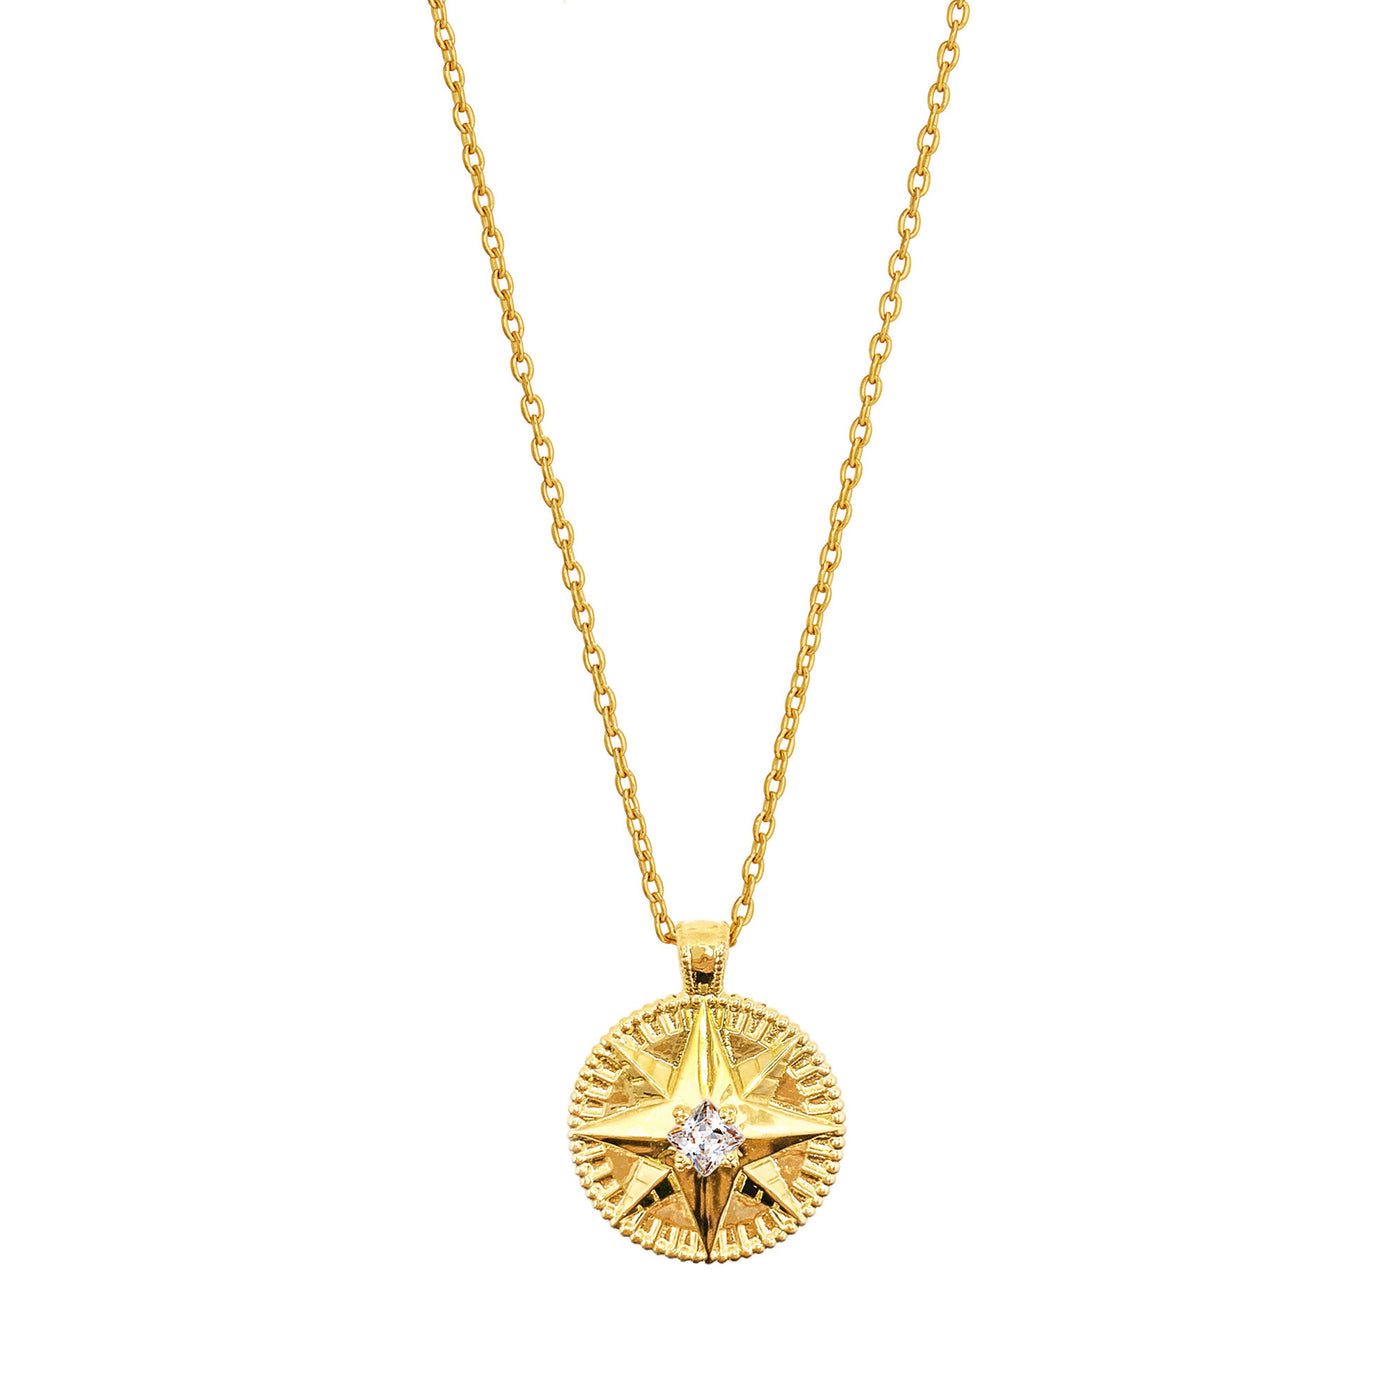 Gold plated sterling silver 3D engraved star coin necklace with CZ crystal